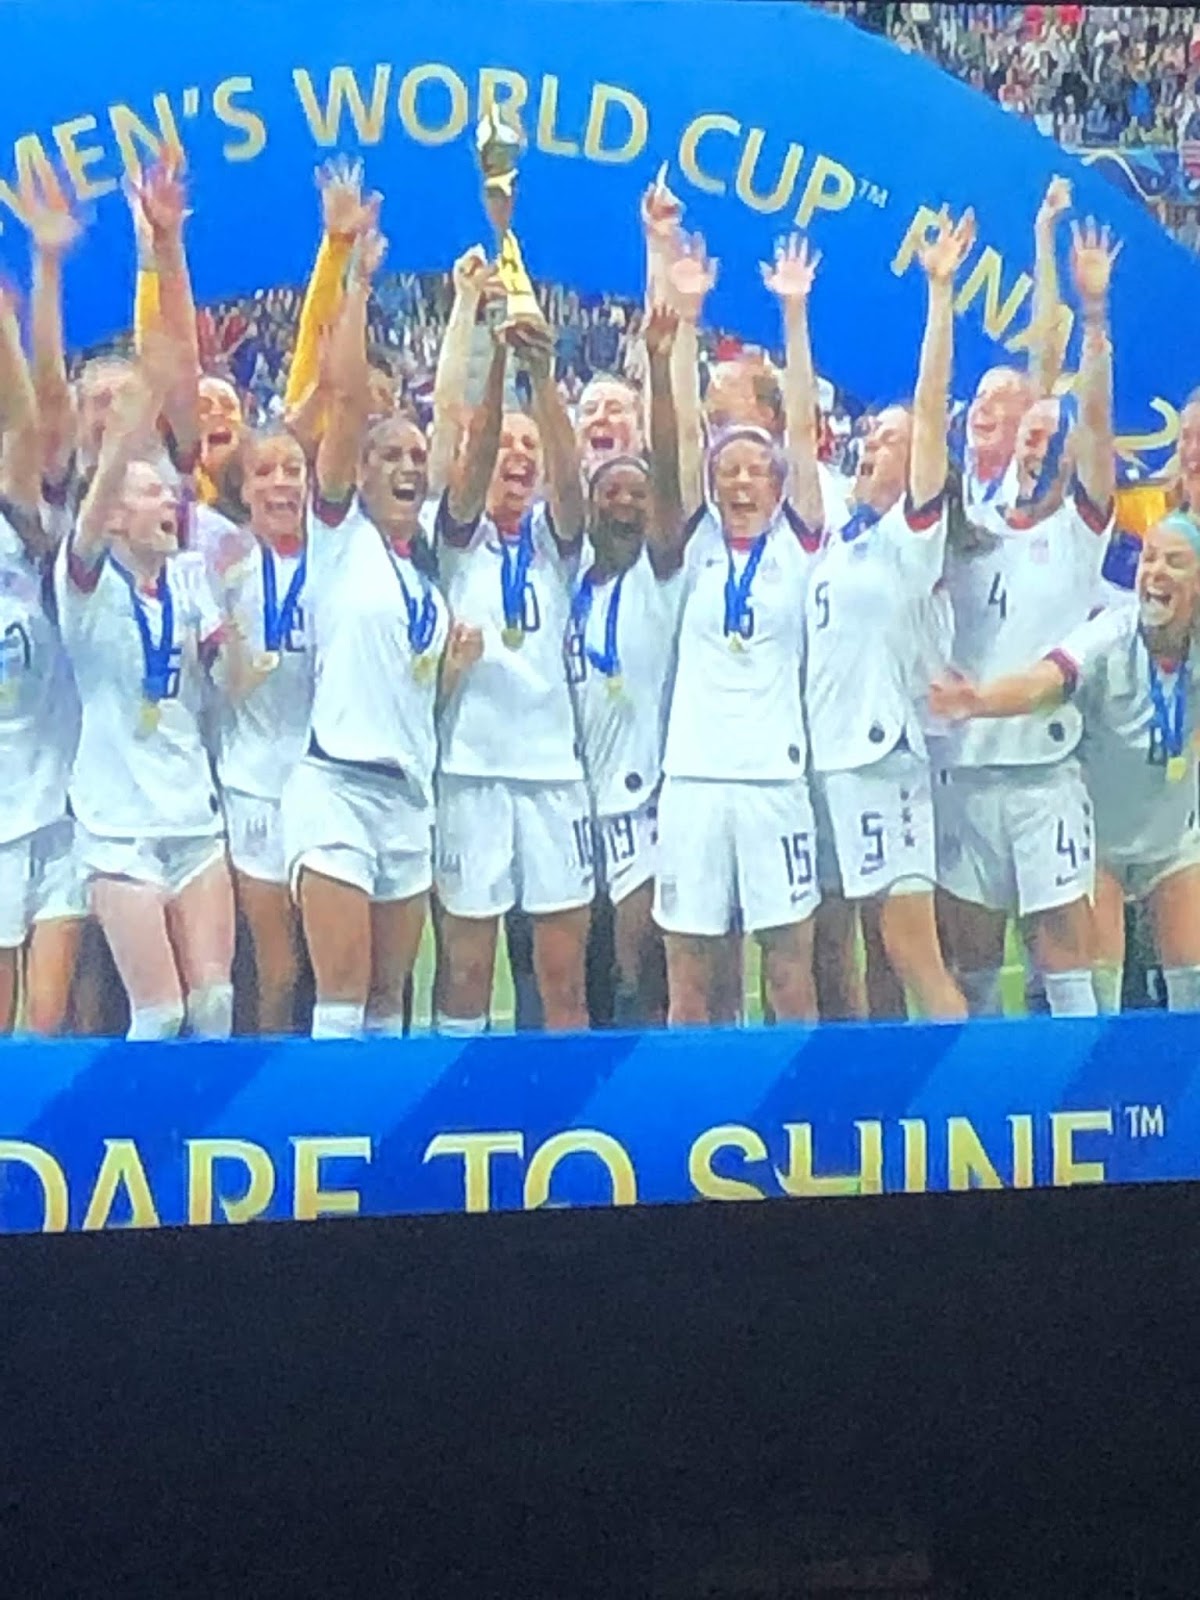 FIFAWWC19 FINAL USA vs Netherlands It's All Over - TheNorthernGirl